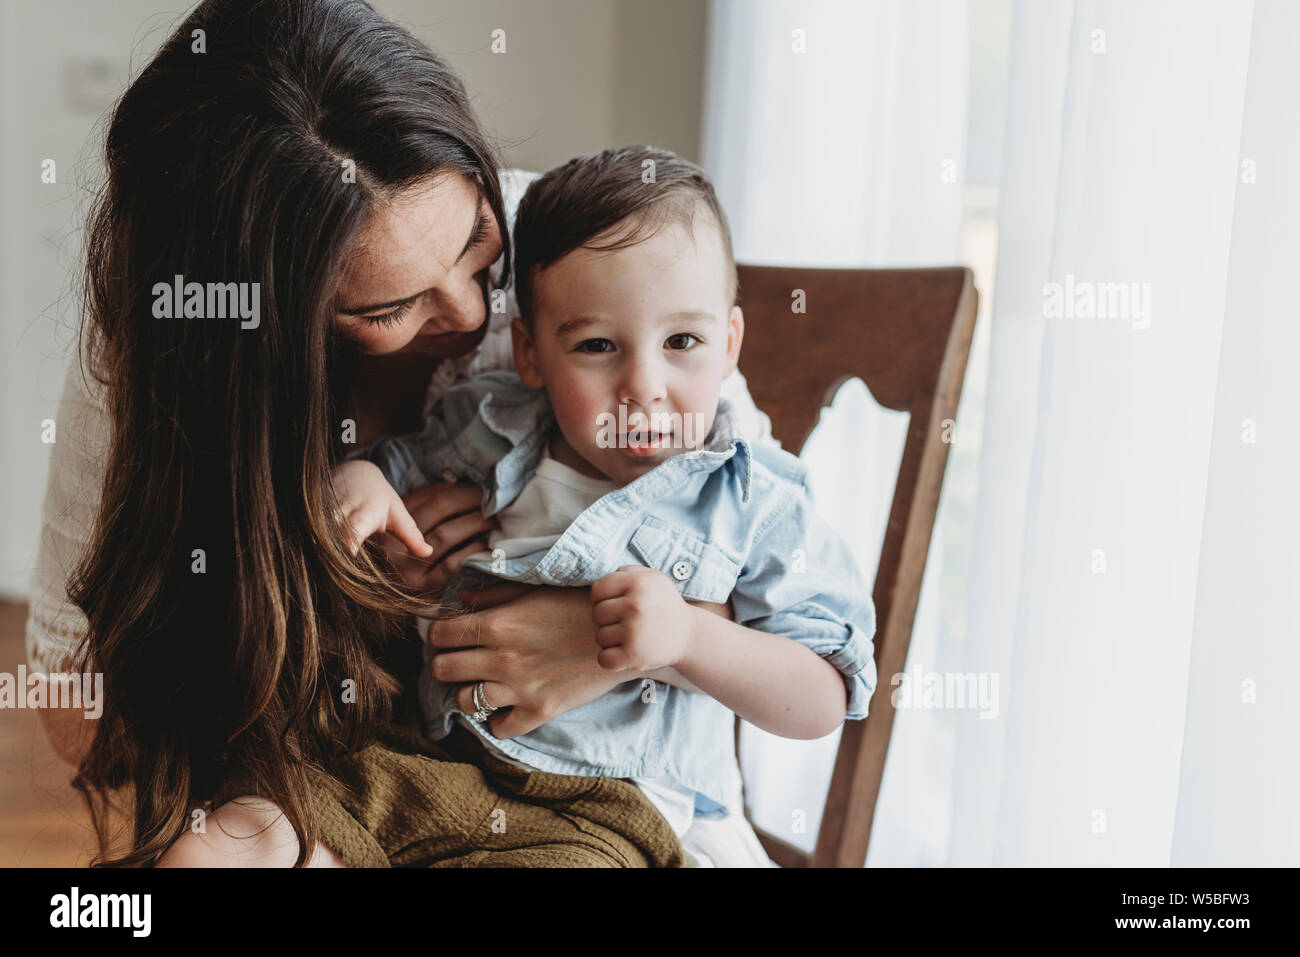 Close up of young preschool age boy being embraced by mother in studio Stock Photo